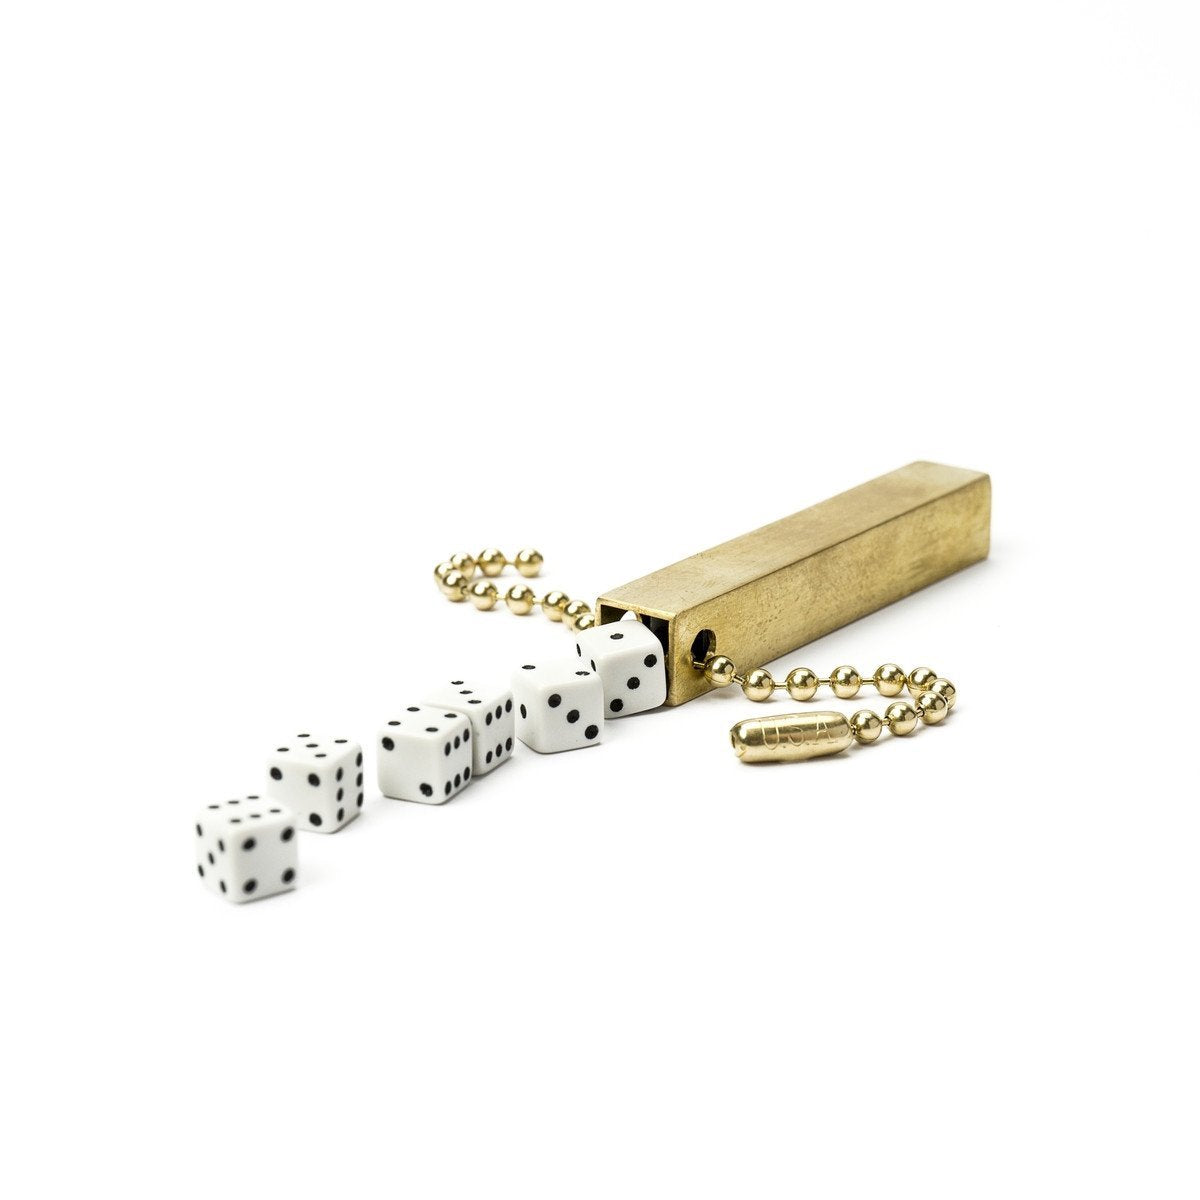 White background variant photo of brass travel dice with white dice and a keychain